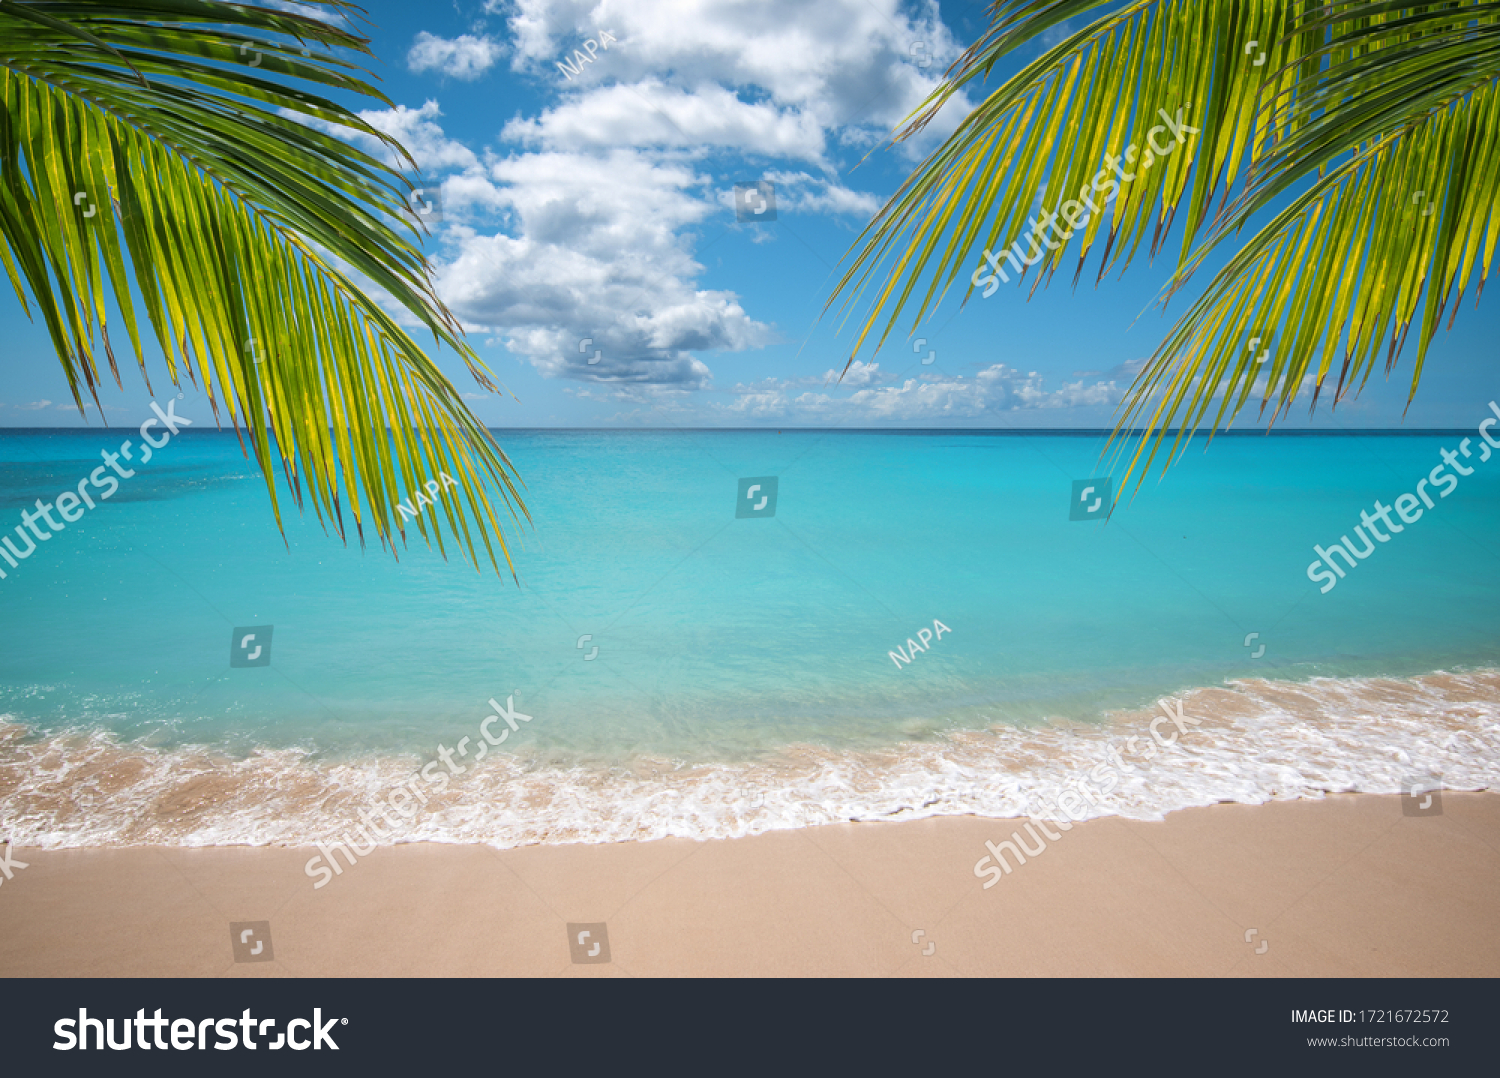 Tropical vacation paradise with white sandy beaches and swaying palm trees. #1721672572